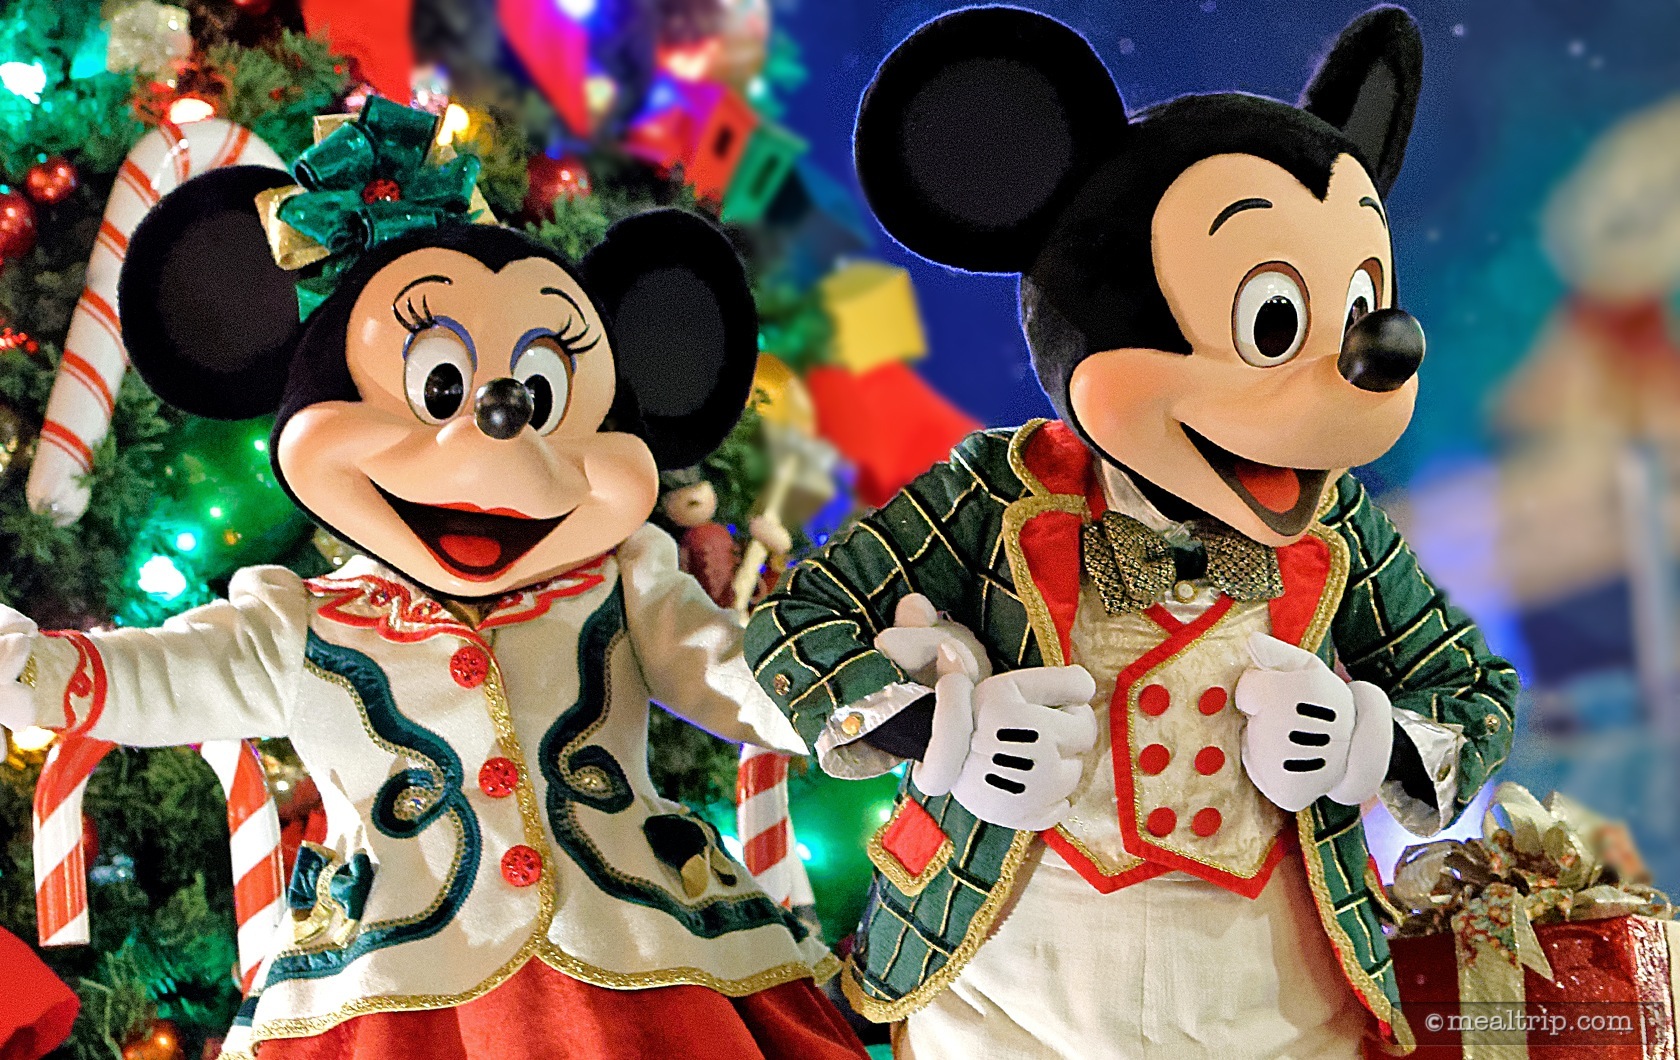 It's Official... Minnie's Holiday Dine at Hollywood & Vine